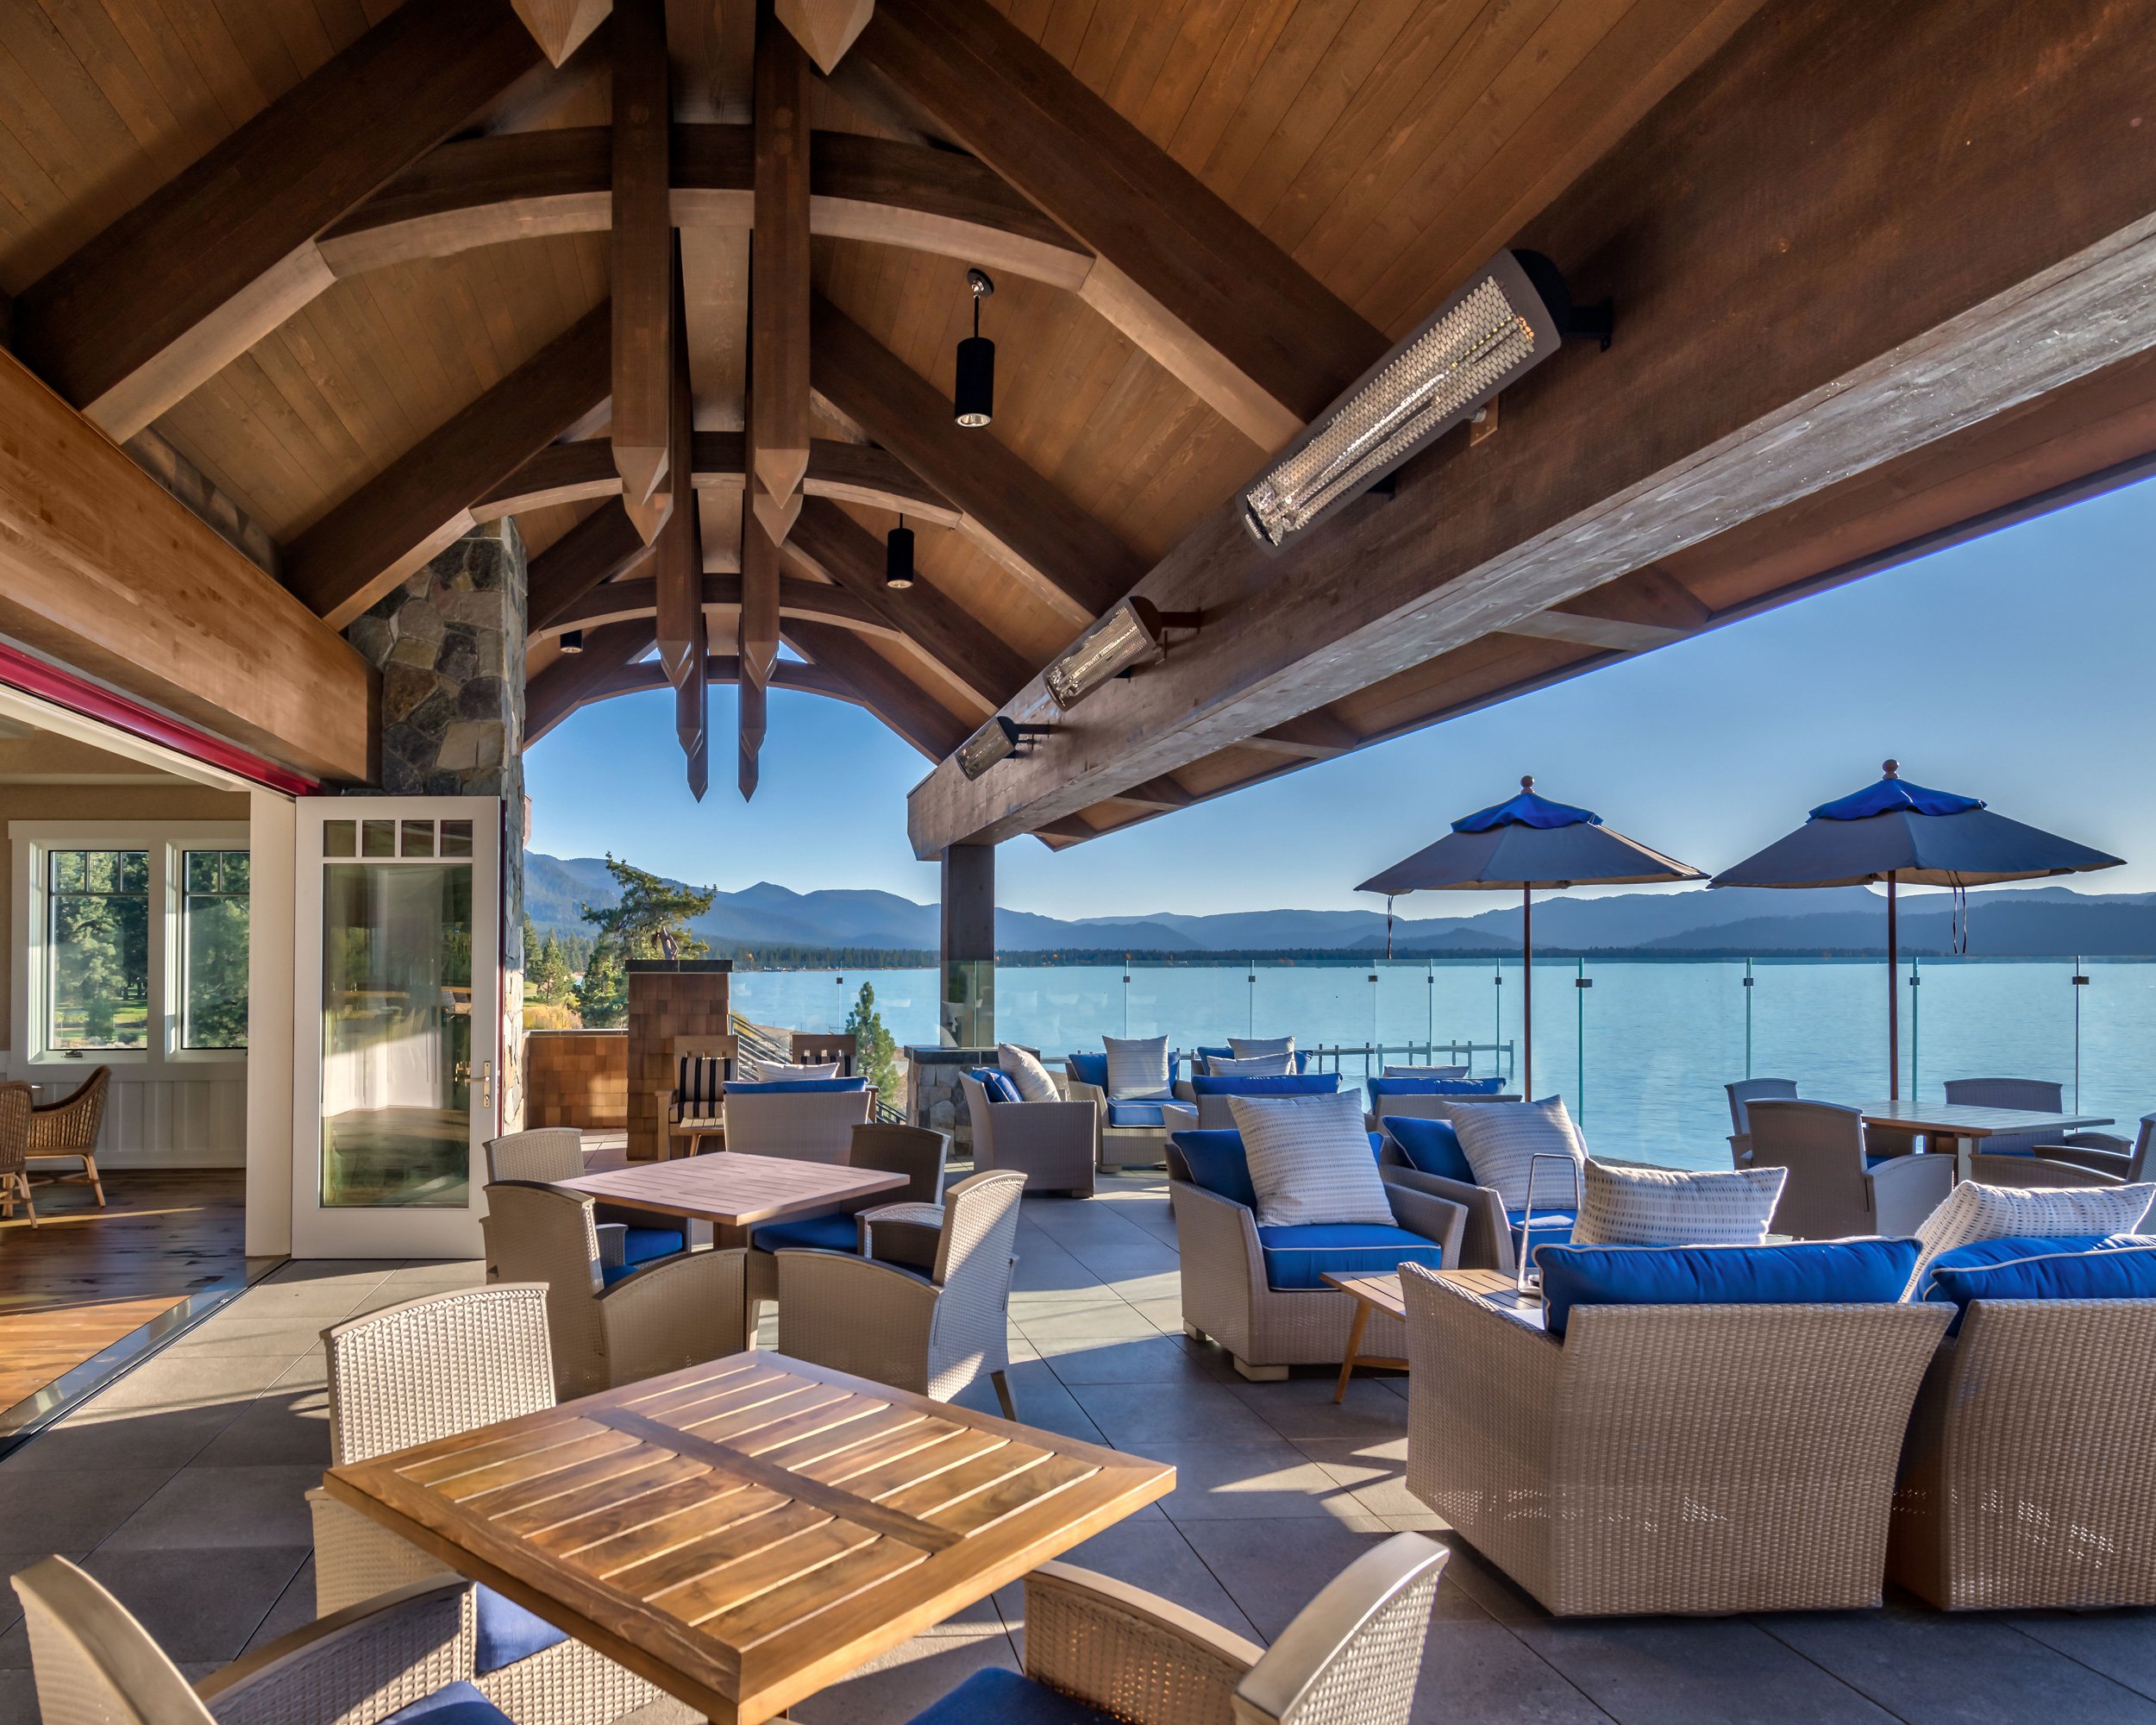 Tahoe Beach Club's serene lakefront patio with breathtaking view of the tranquil waters and surrounding nature.